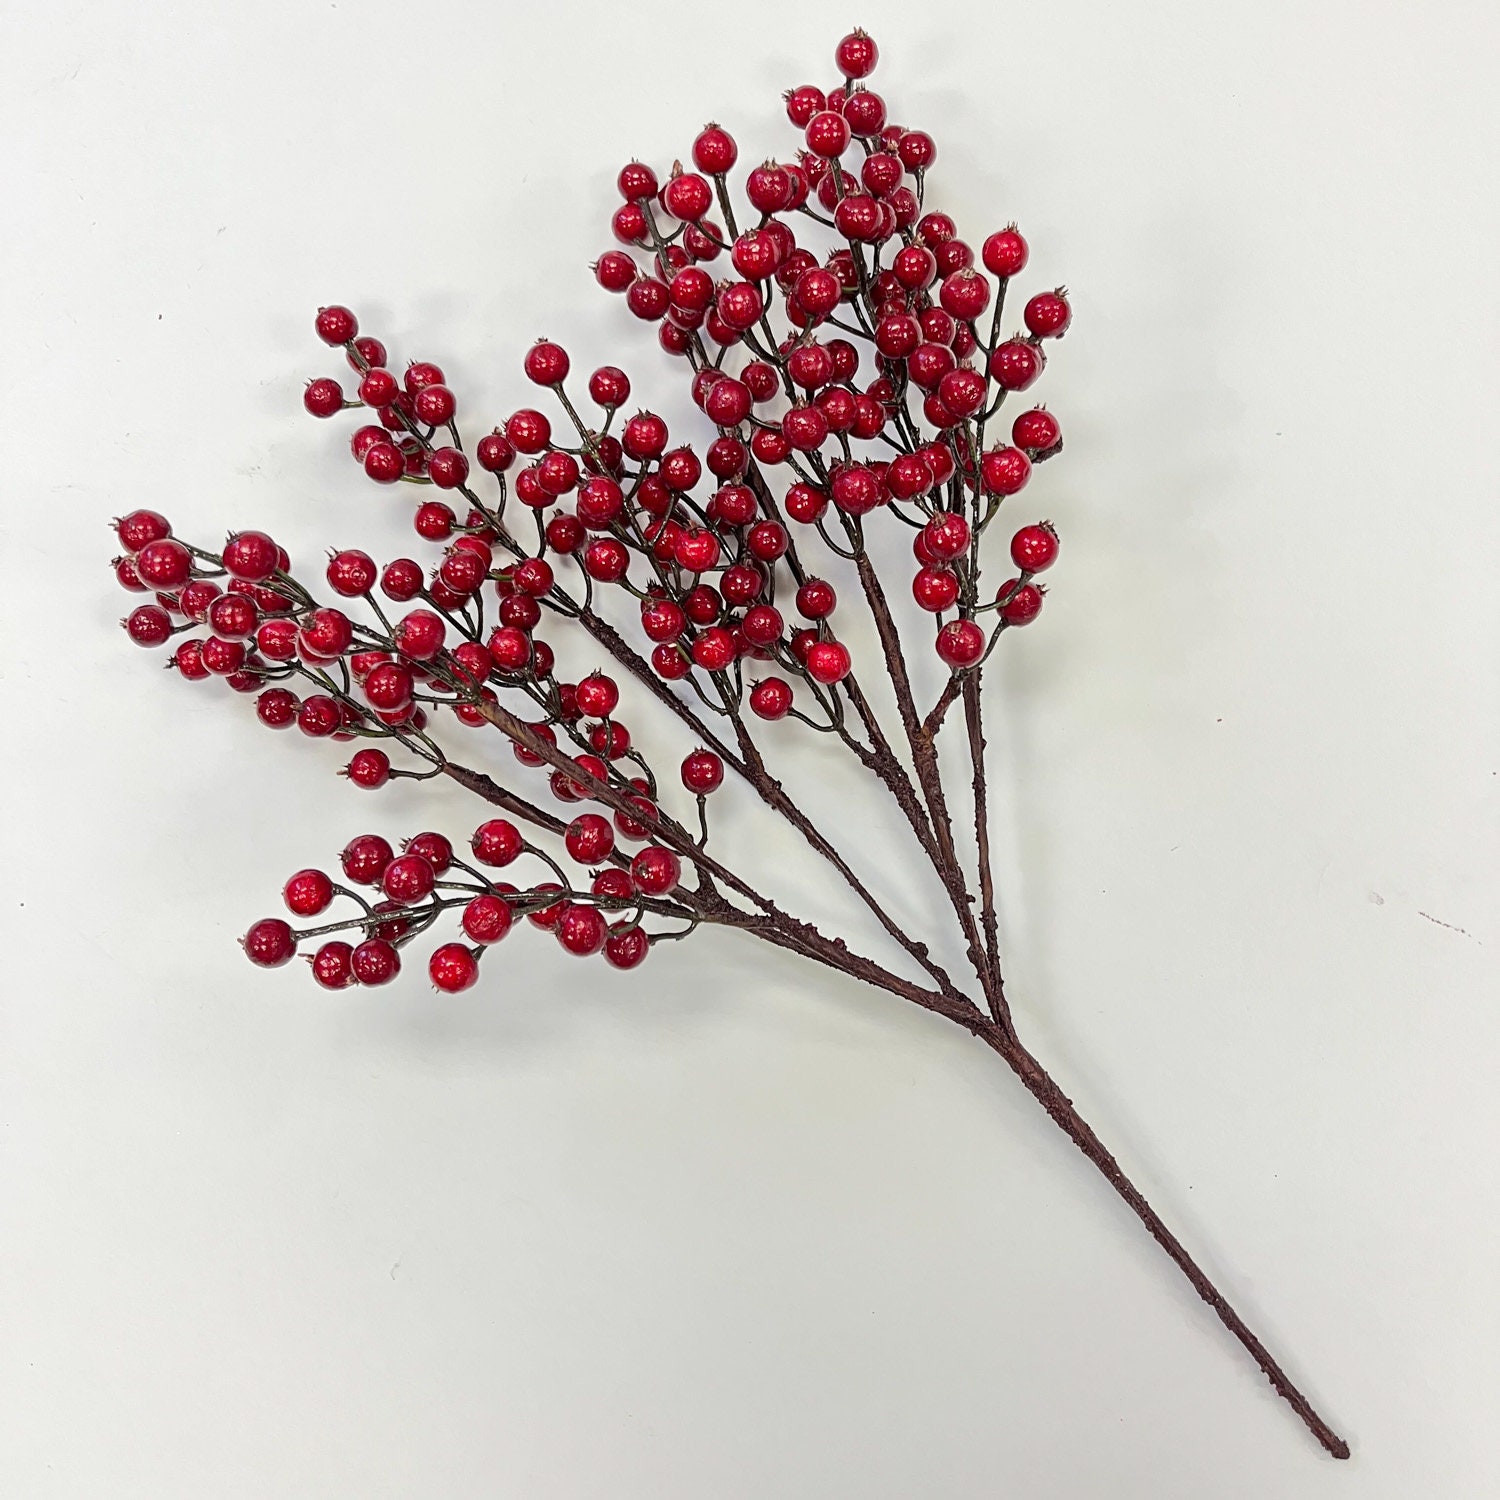 15x Red Berries Stems Joblot Artificial Pick Holly Berry Christmas